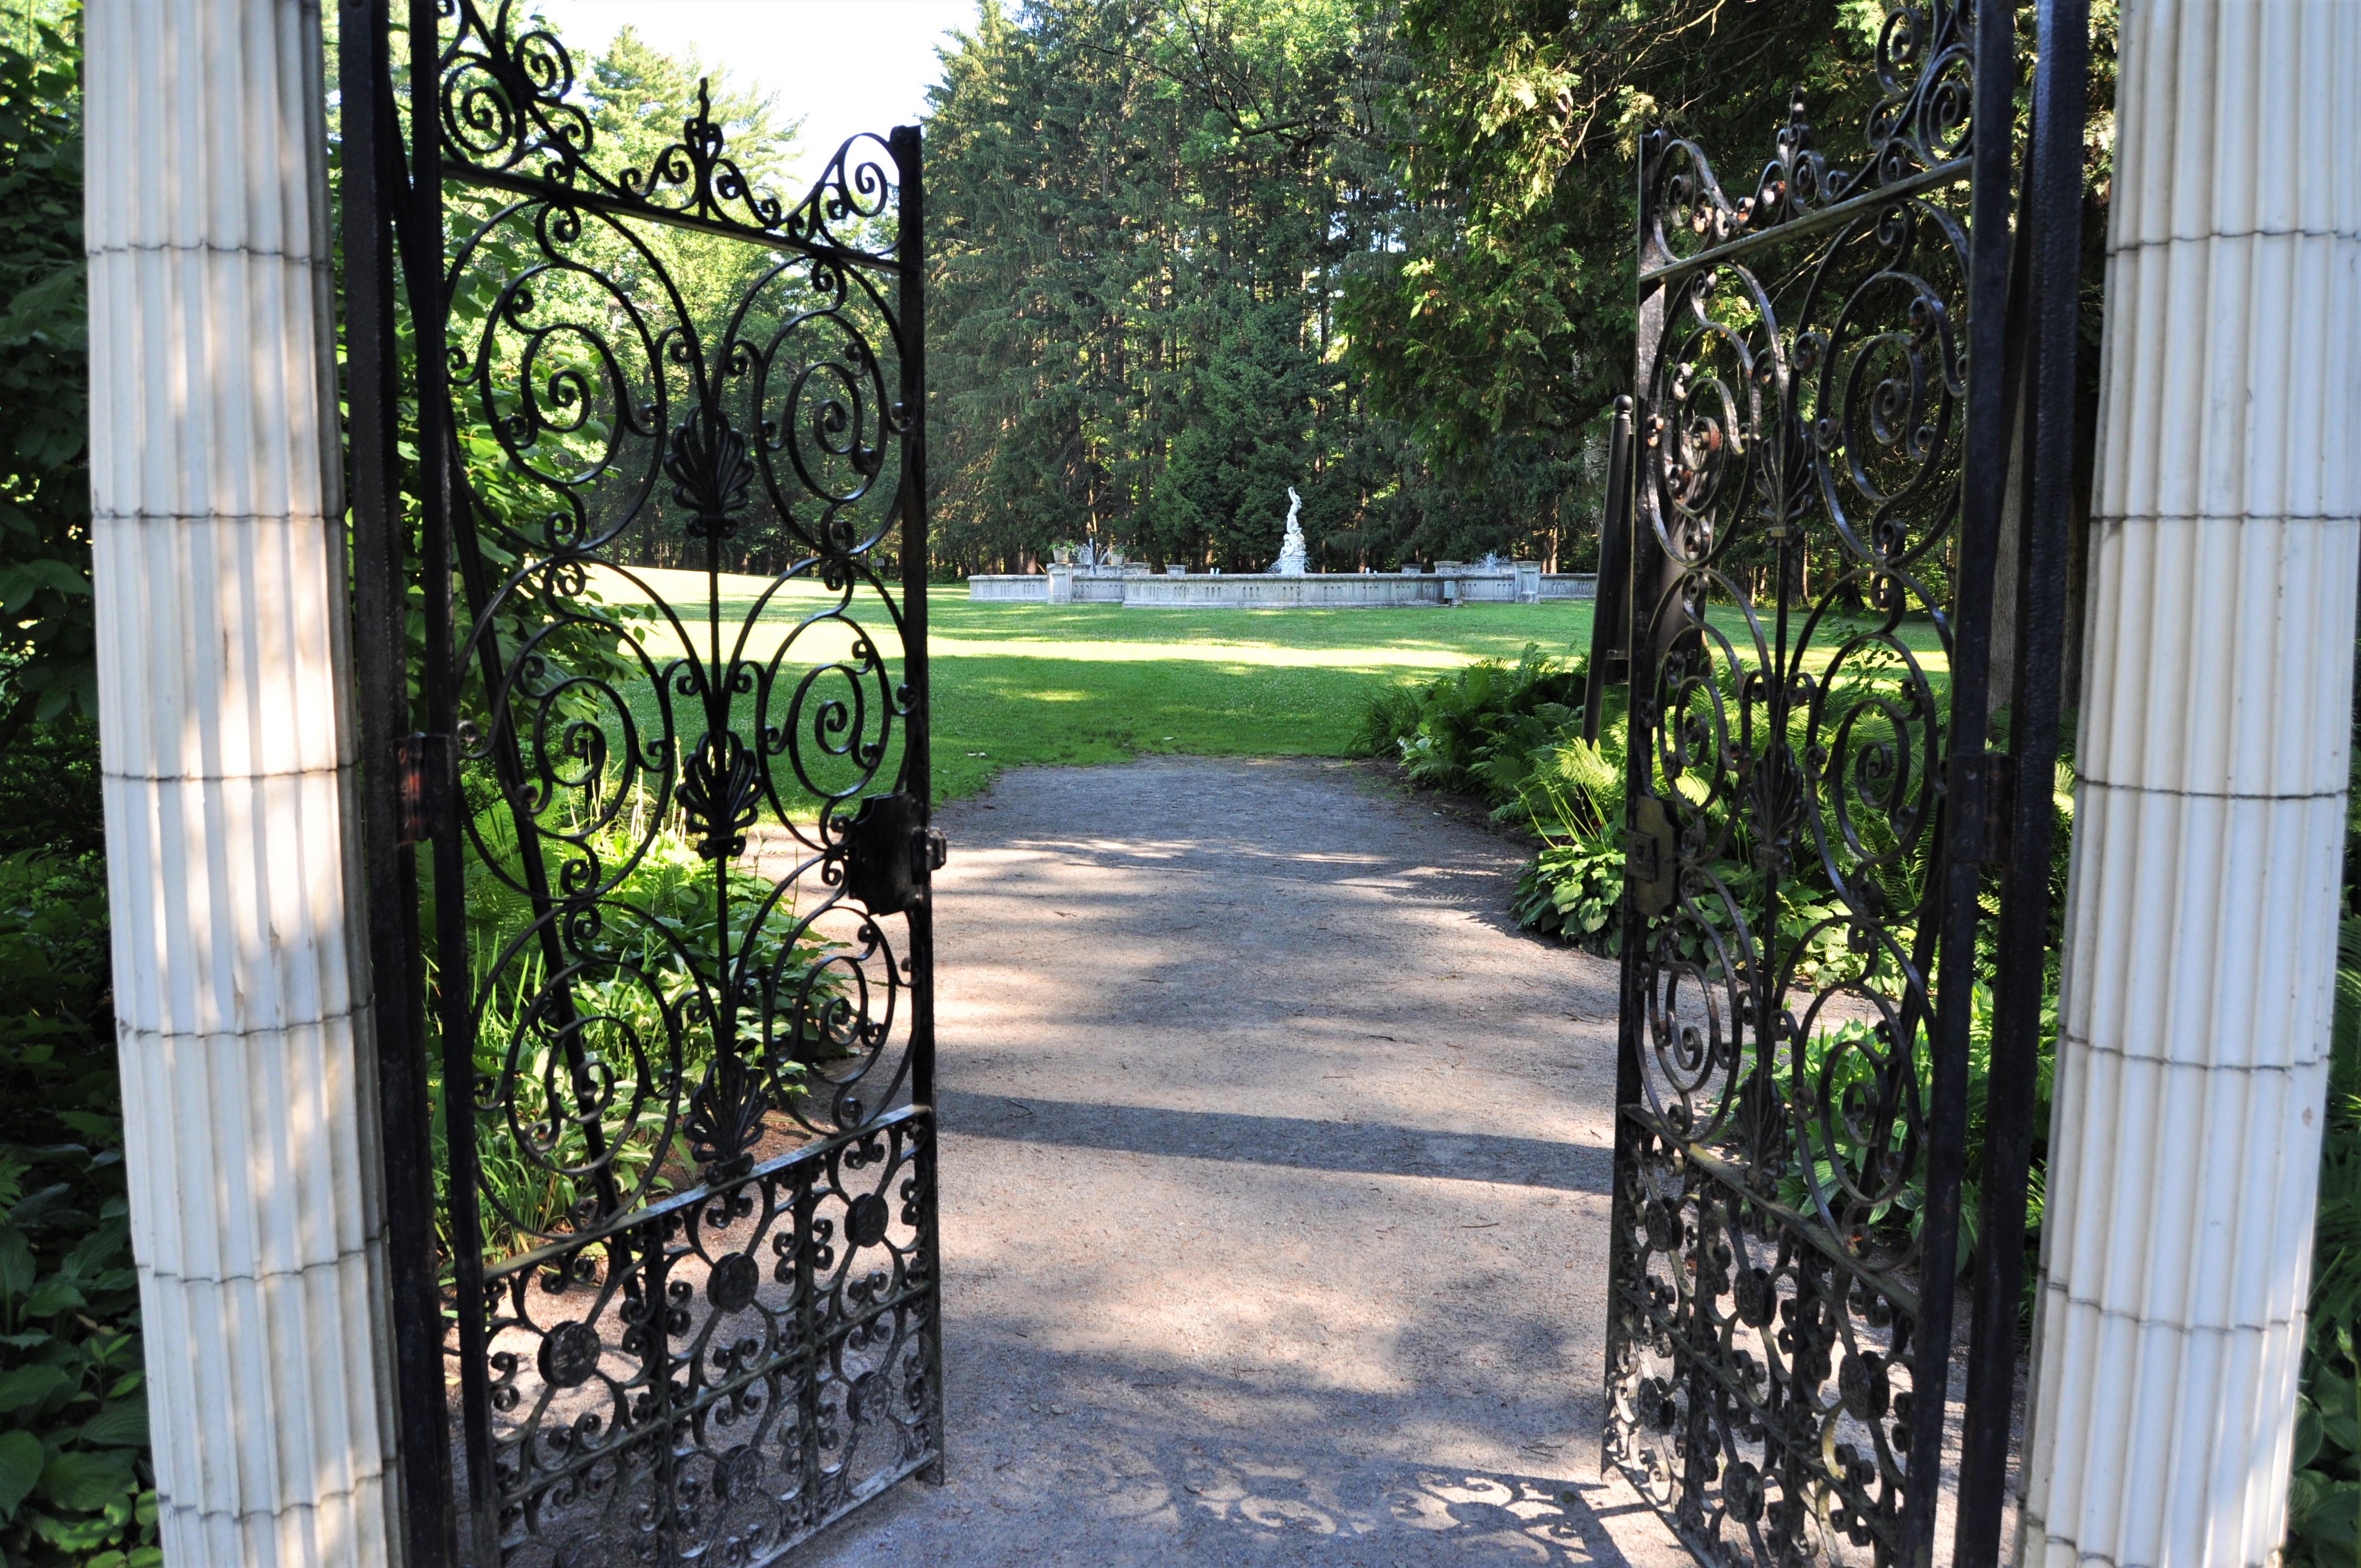 Exiting through gate to leave Yaddo Gardens